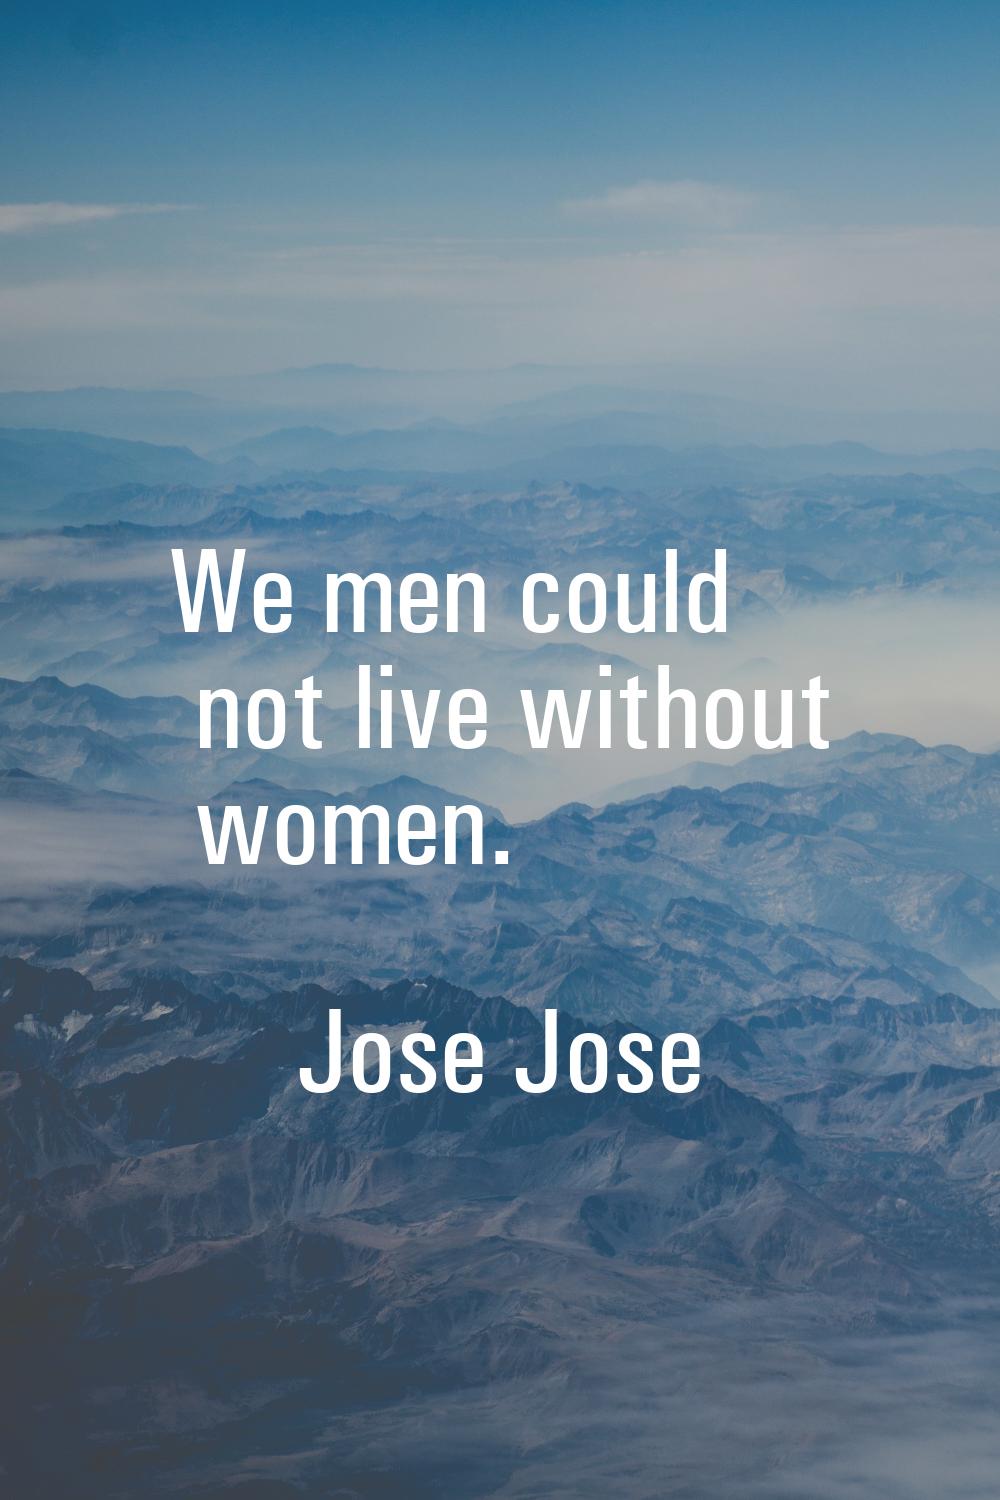 We men could not live without women.